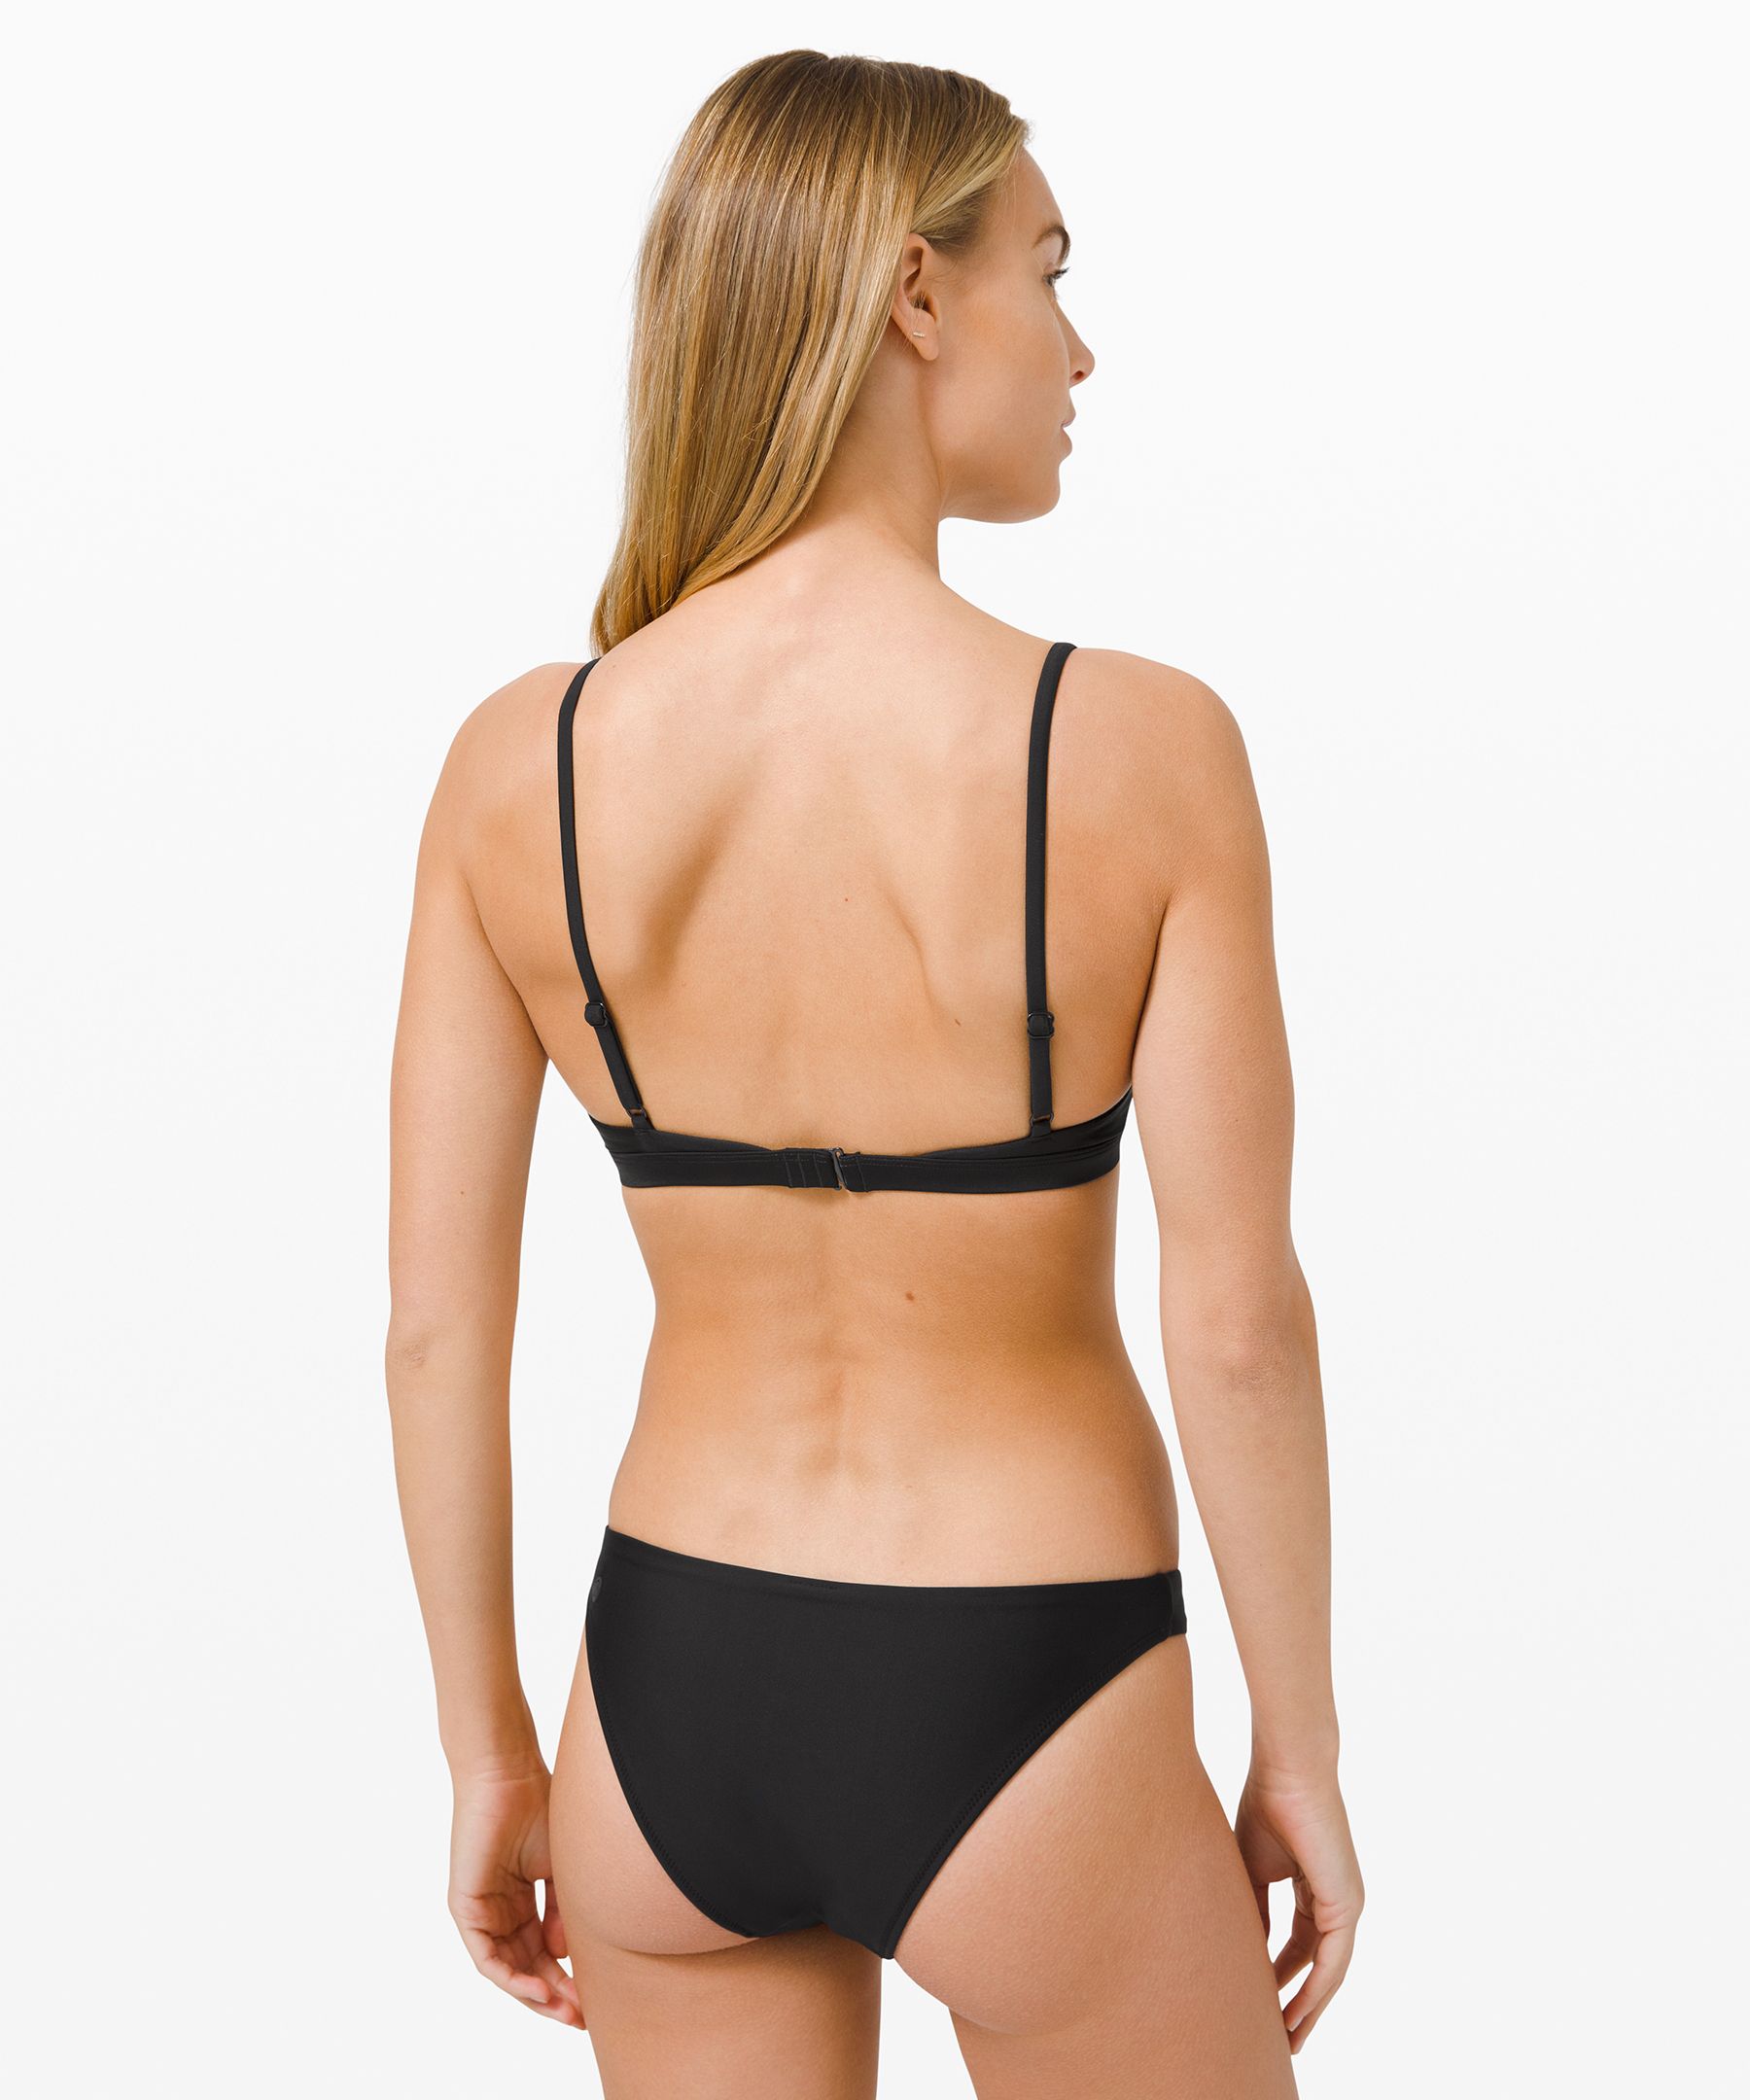 Lululemon Swimsuits Clearance Outlet - True Red Waterside Swim Top A/B Cup  Womens